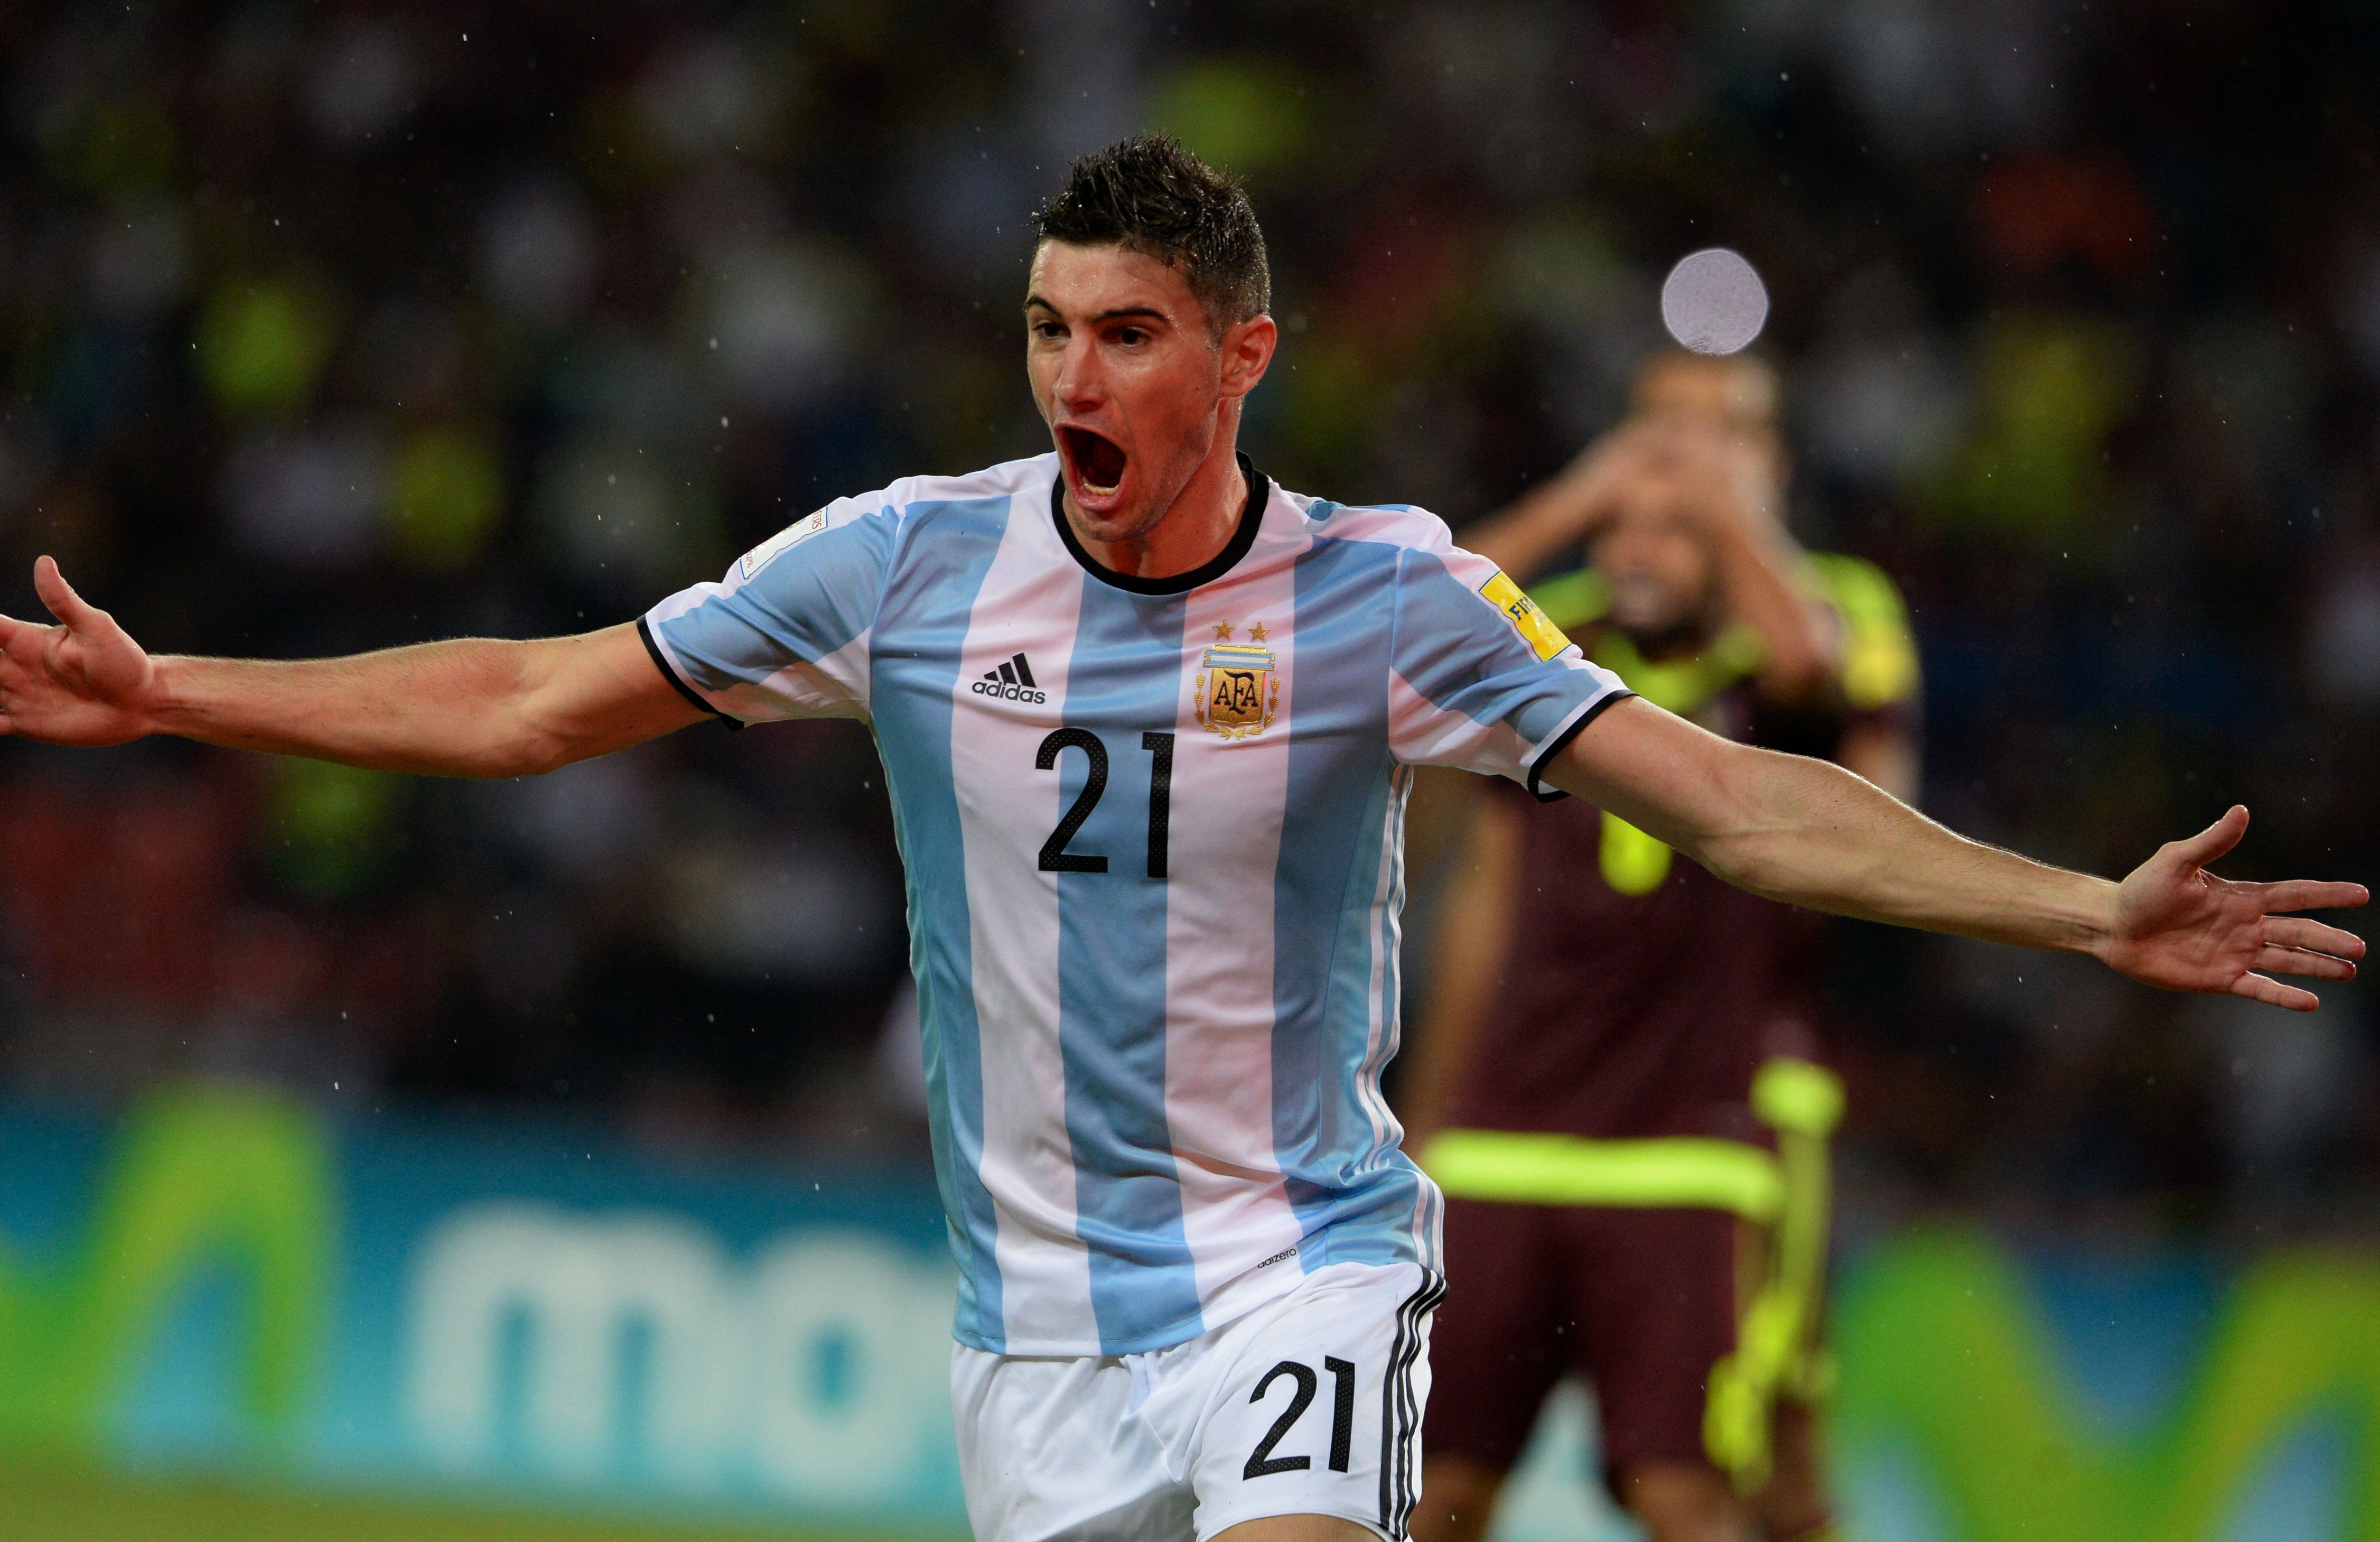 Argentina's Lucas Alario celebrates after a teammate scored against Venezuela during their Russia 2018 World Cup football qualifier match in Merida, Venezuela, on September 6, 2016. / AFP / FEDERICO PARRA        (Photo credit should read FEDERICO PARRA/AFP/Getty Images)